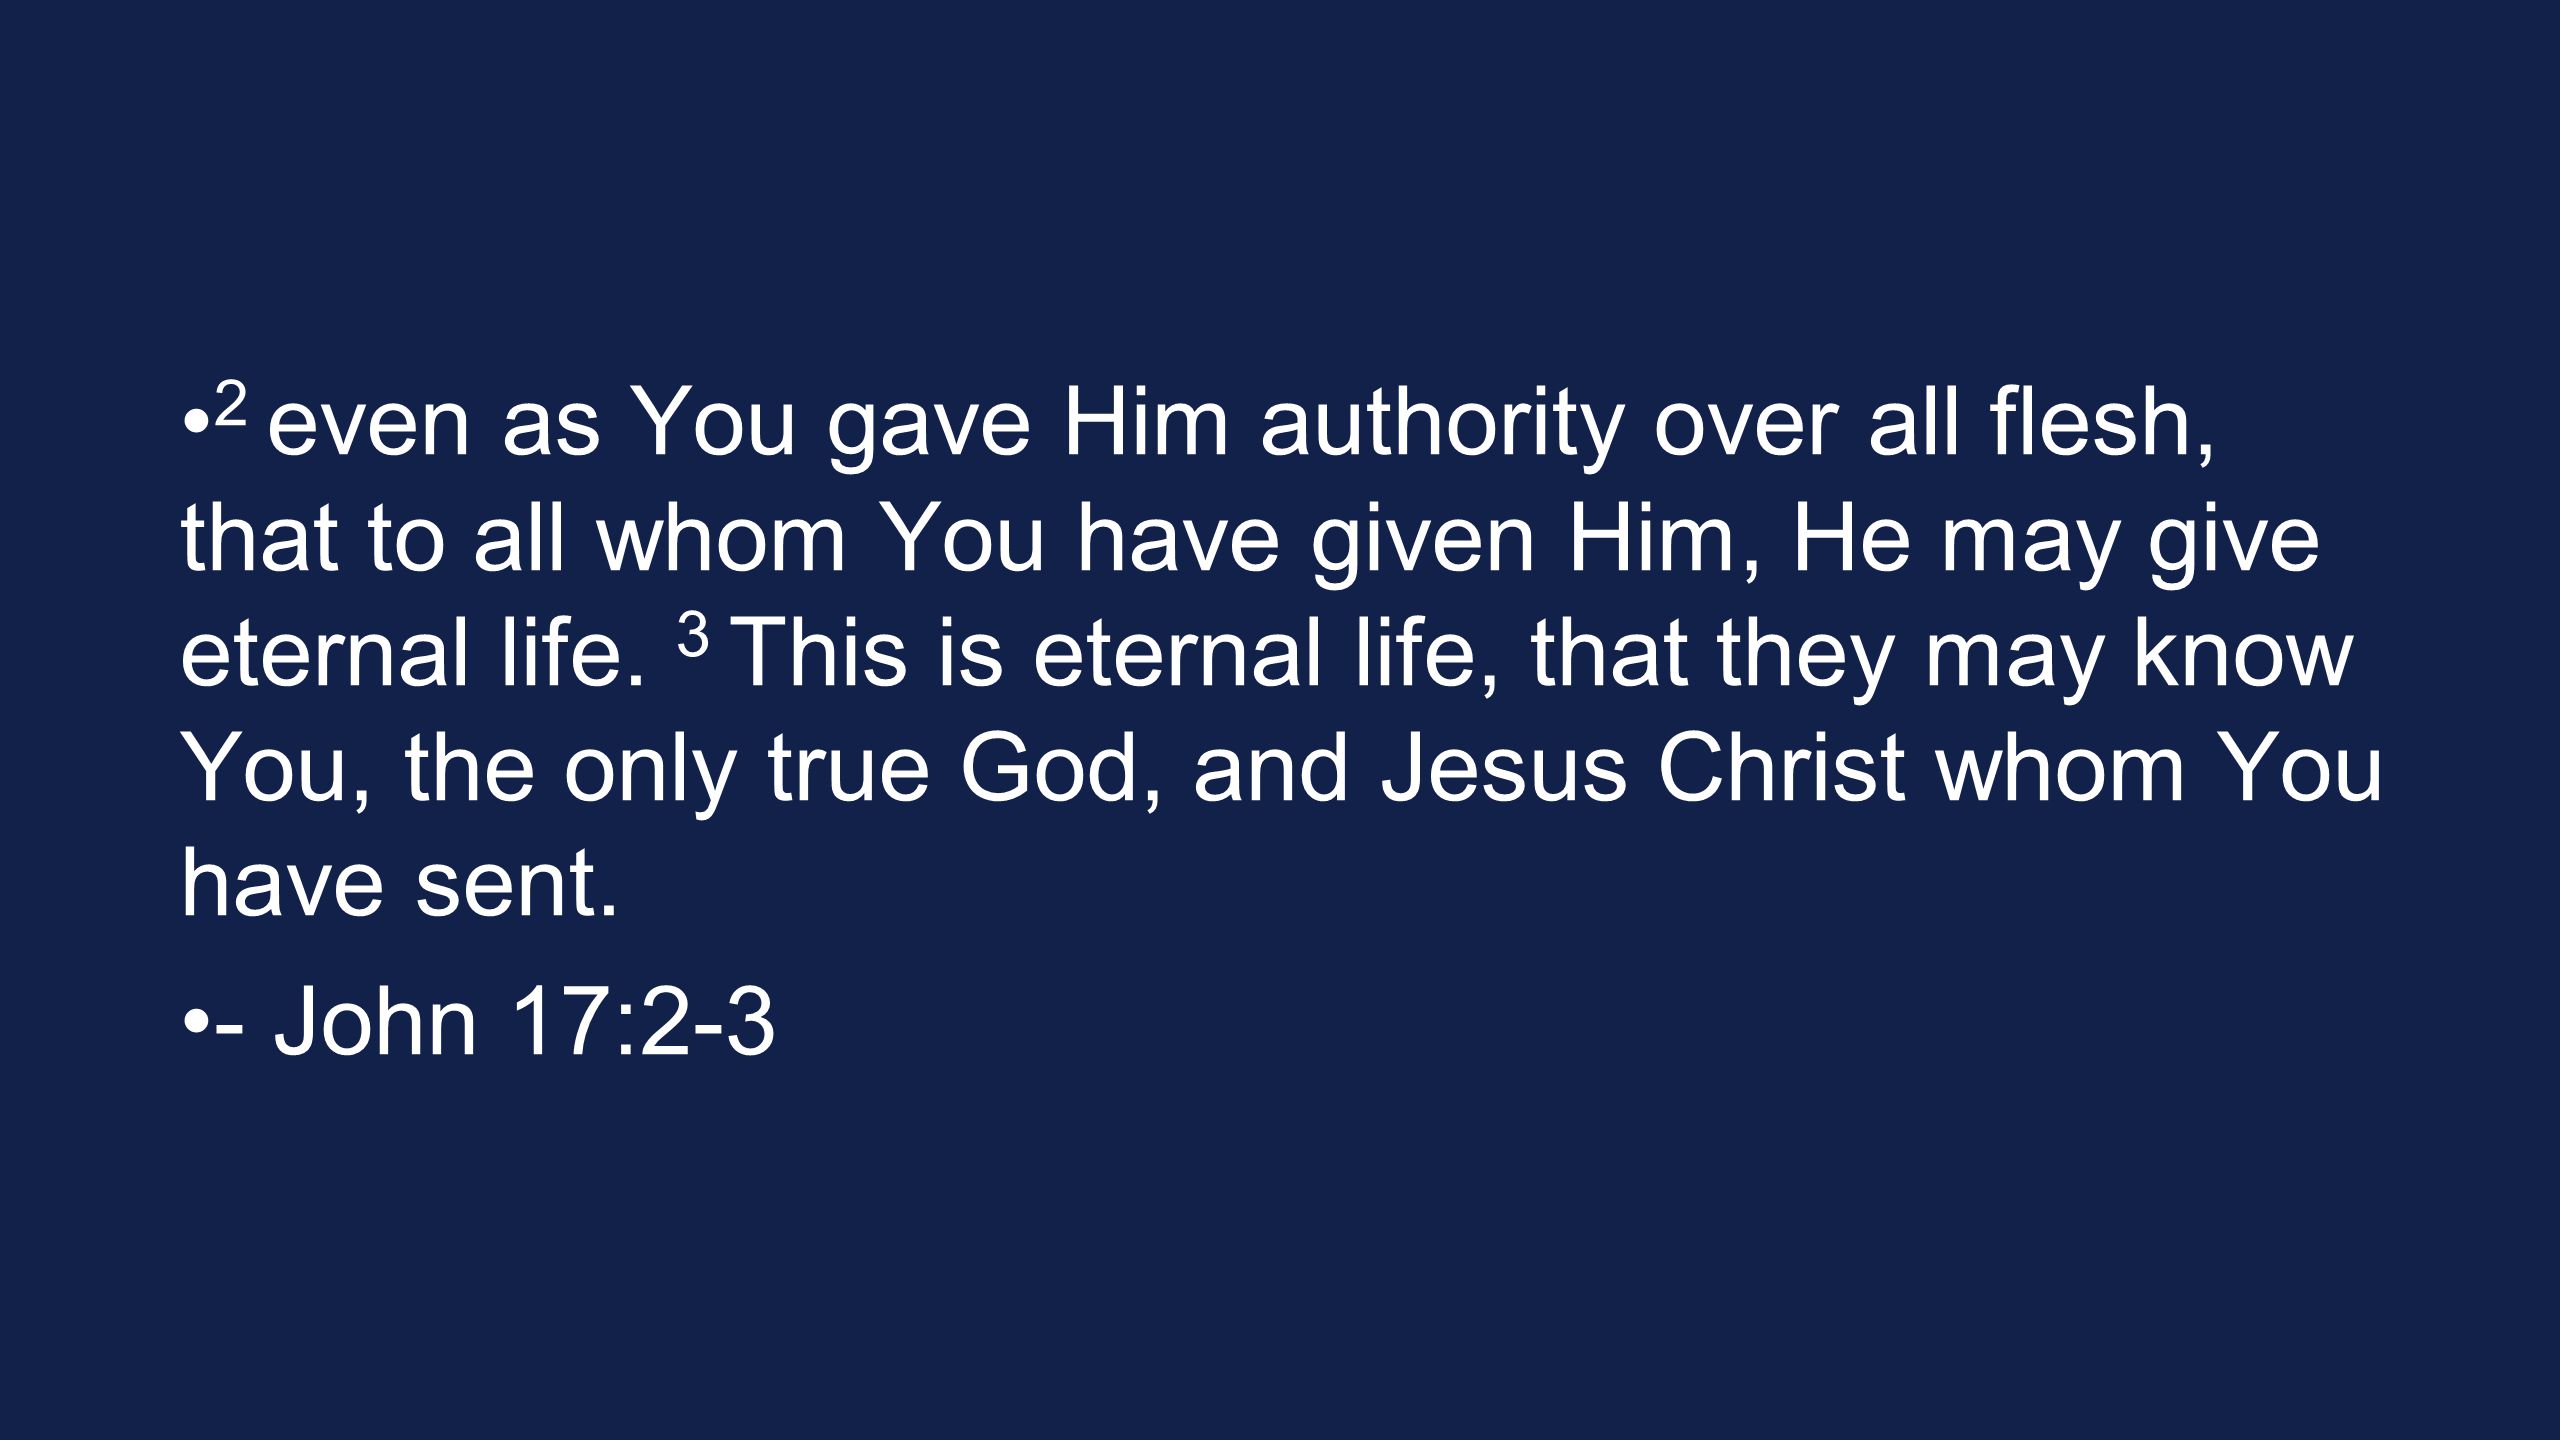 2 even as You gave Him authority over all flesh, that to all whom You have given Him, He may give eternal life. 3 This is eternal life, that they may know You, the only true God, and Jesus Christ whom You have sent.